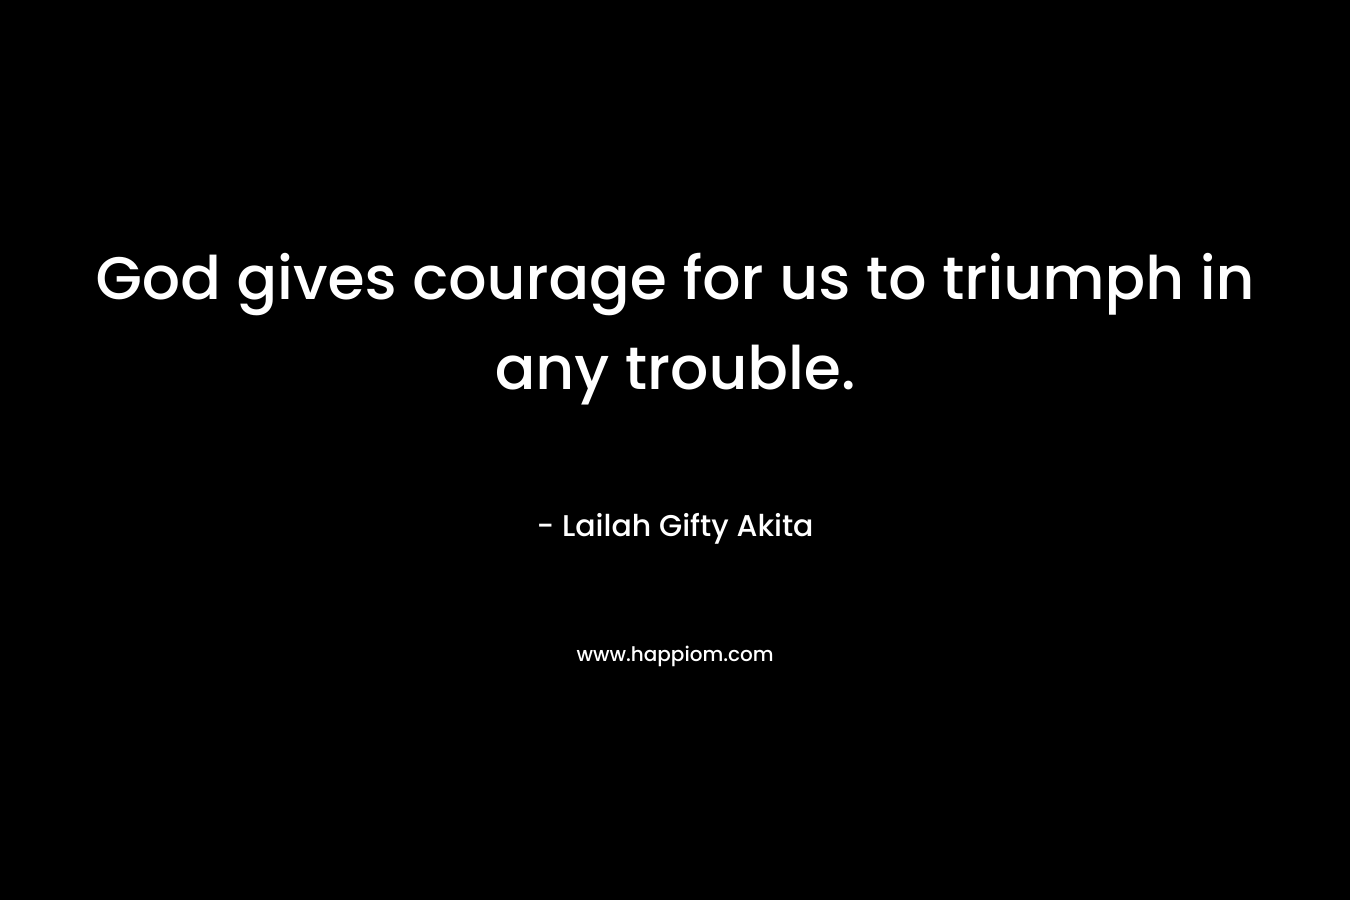 God gives courage for us to triumph in any trouble.